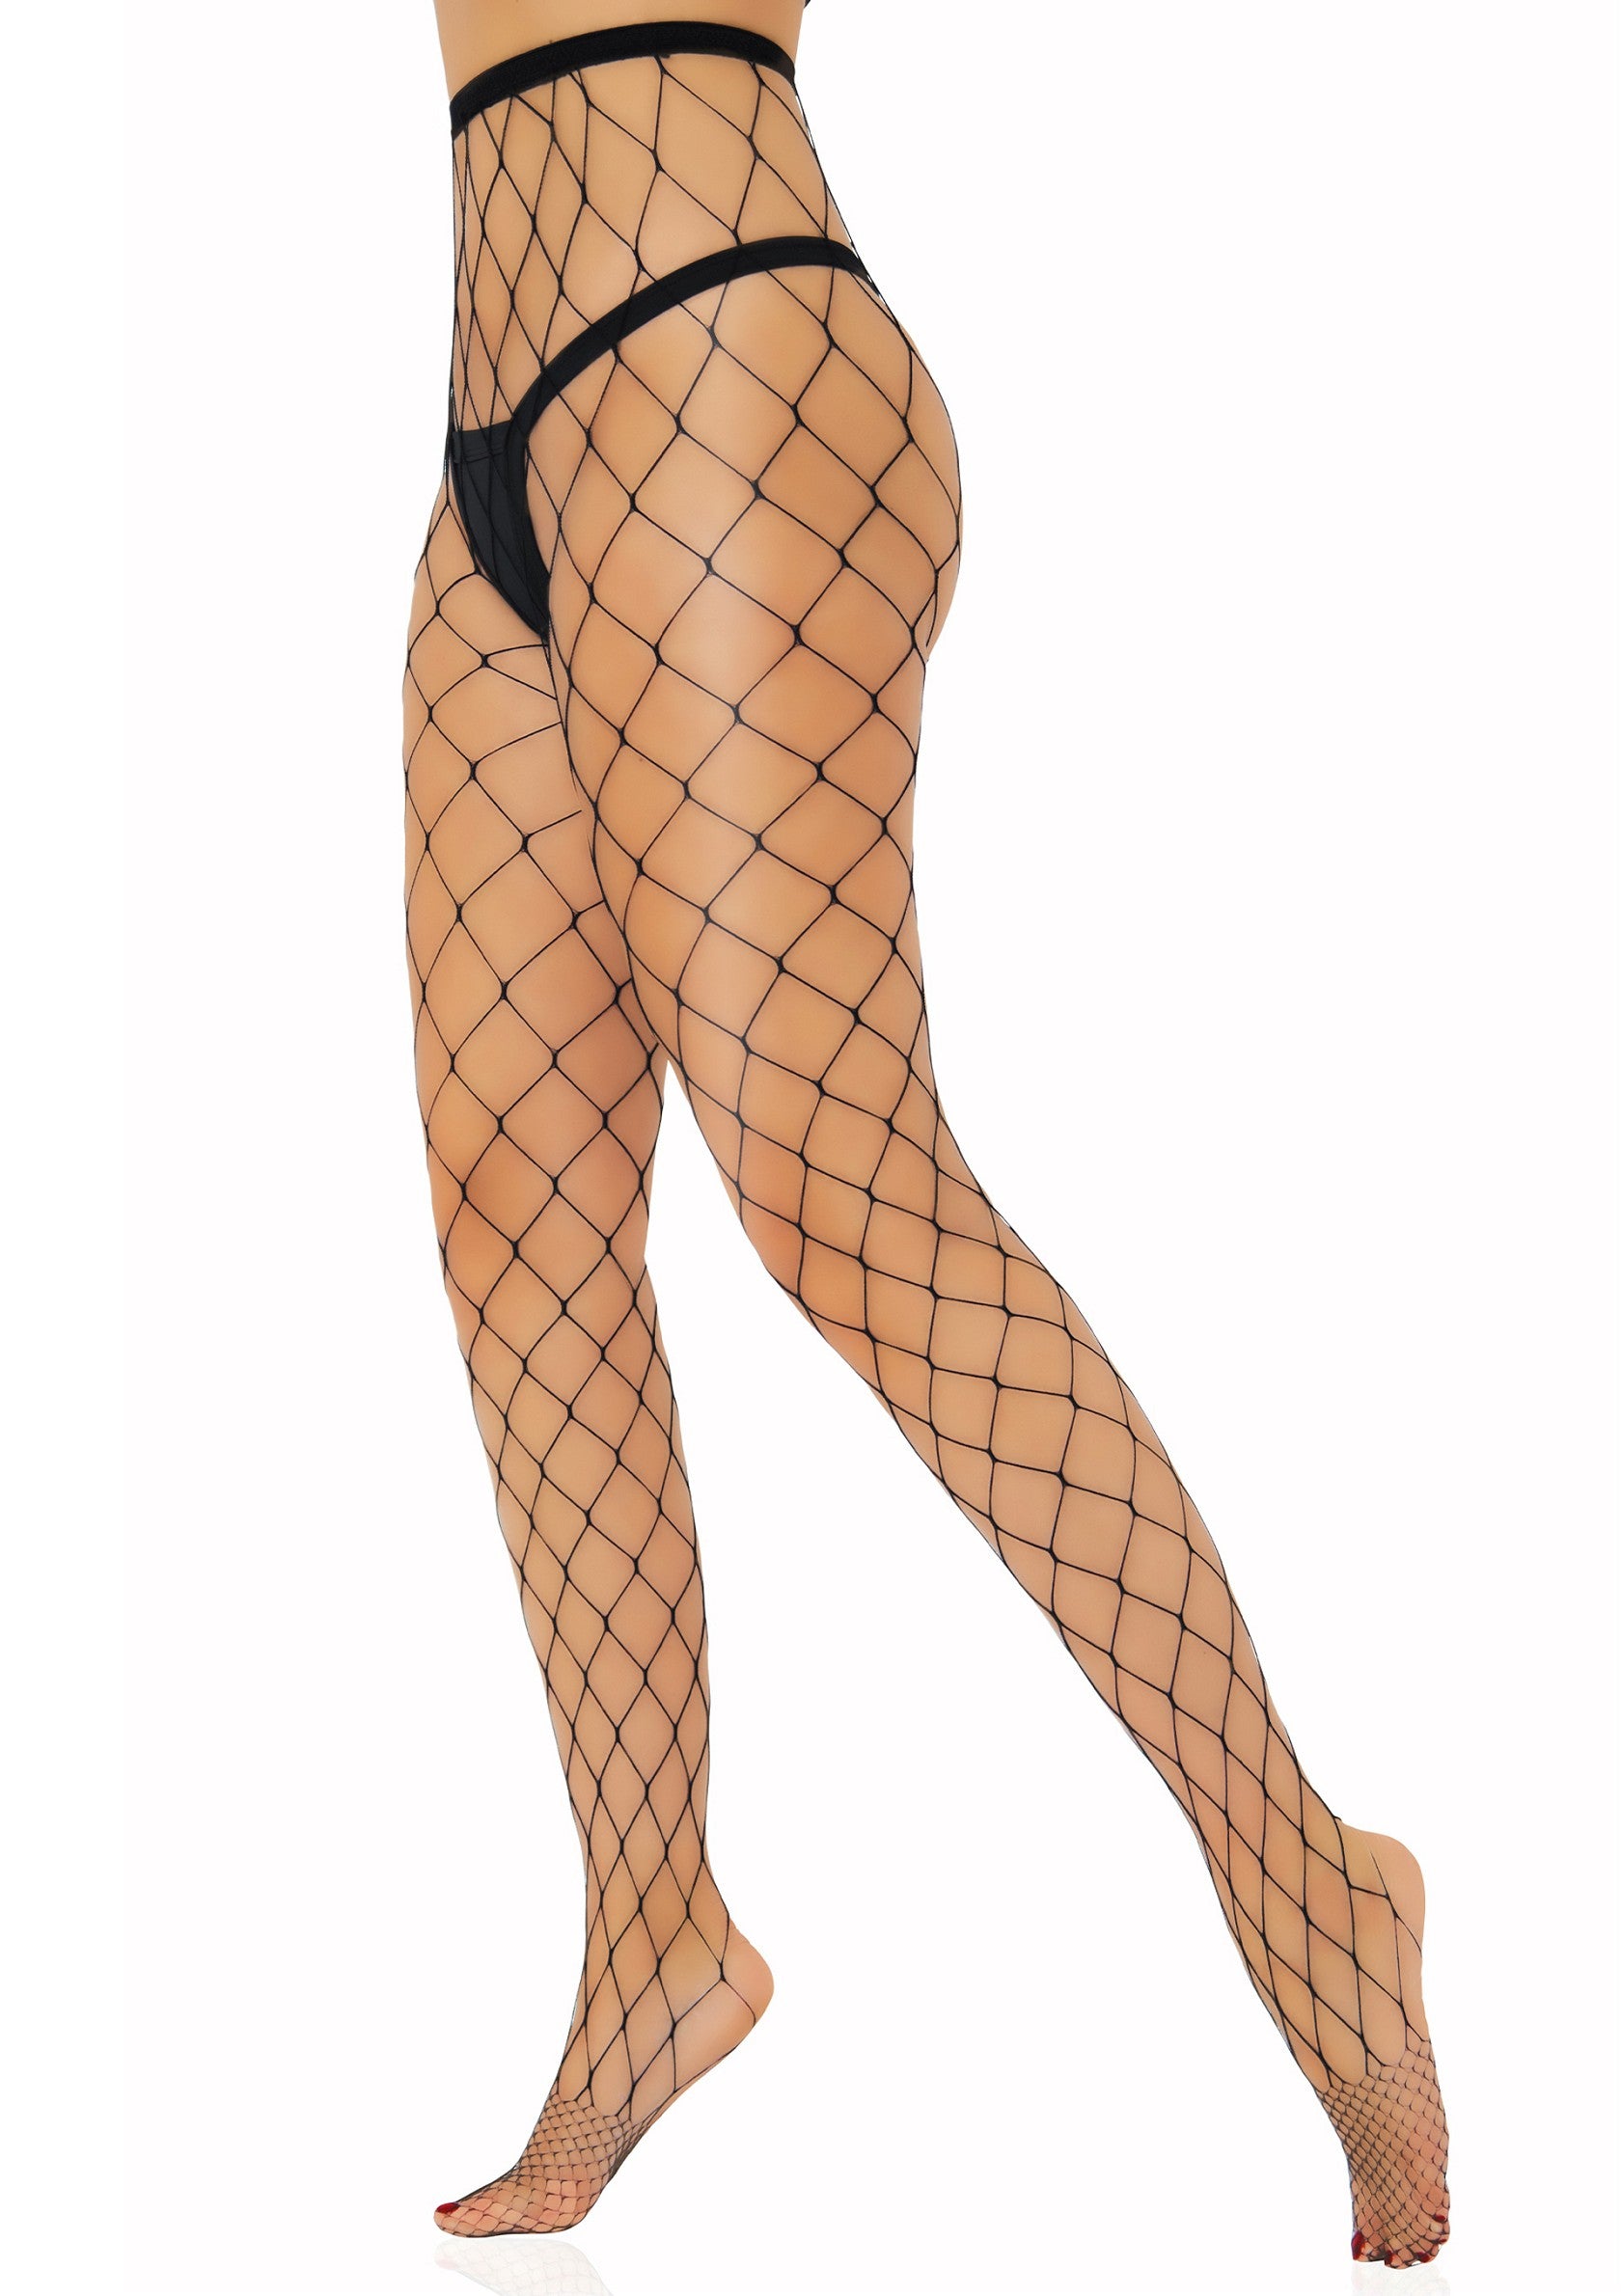 Daring Intimates Over Sized Net Tights BLACK O/S - 4